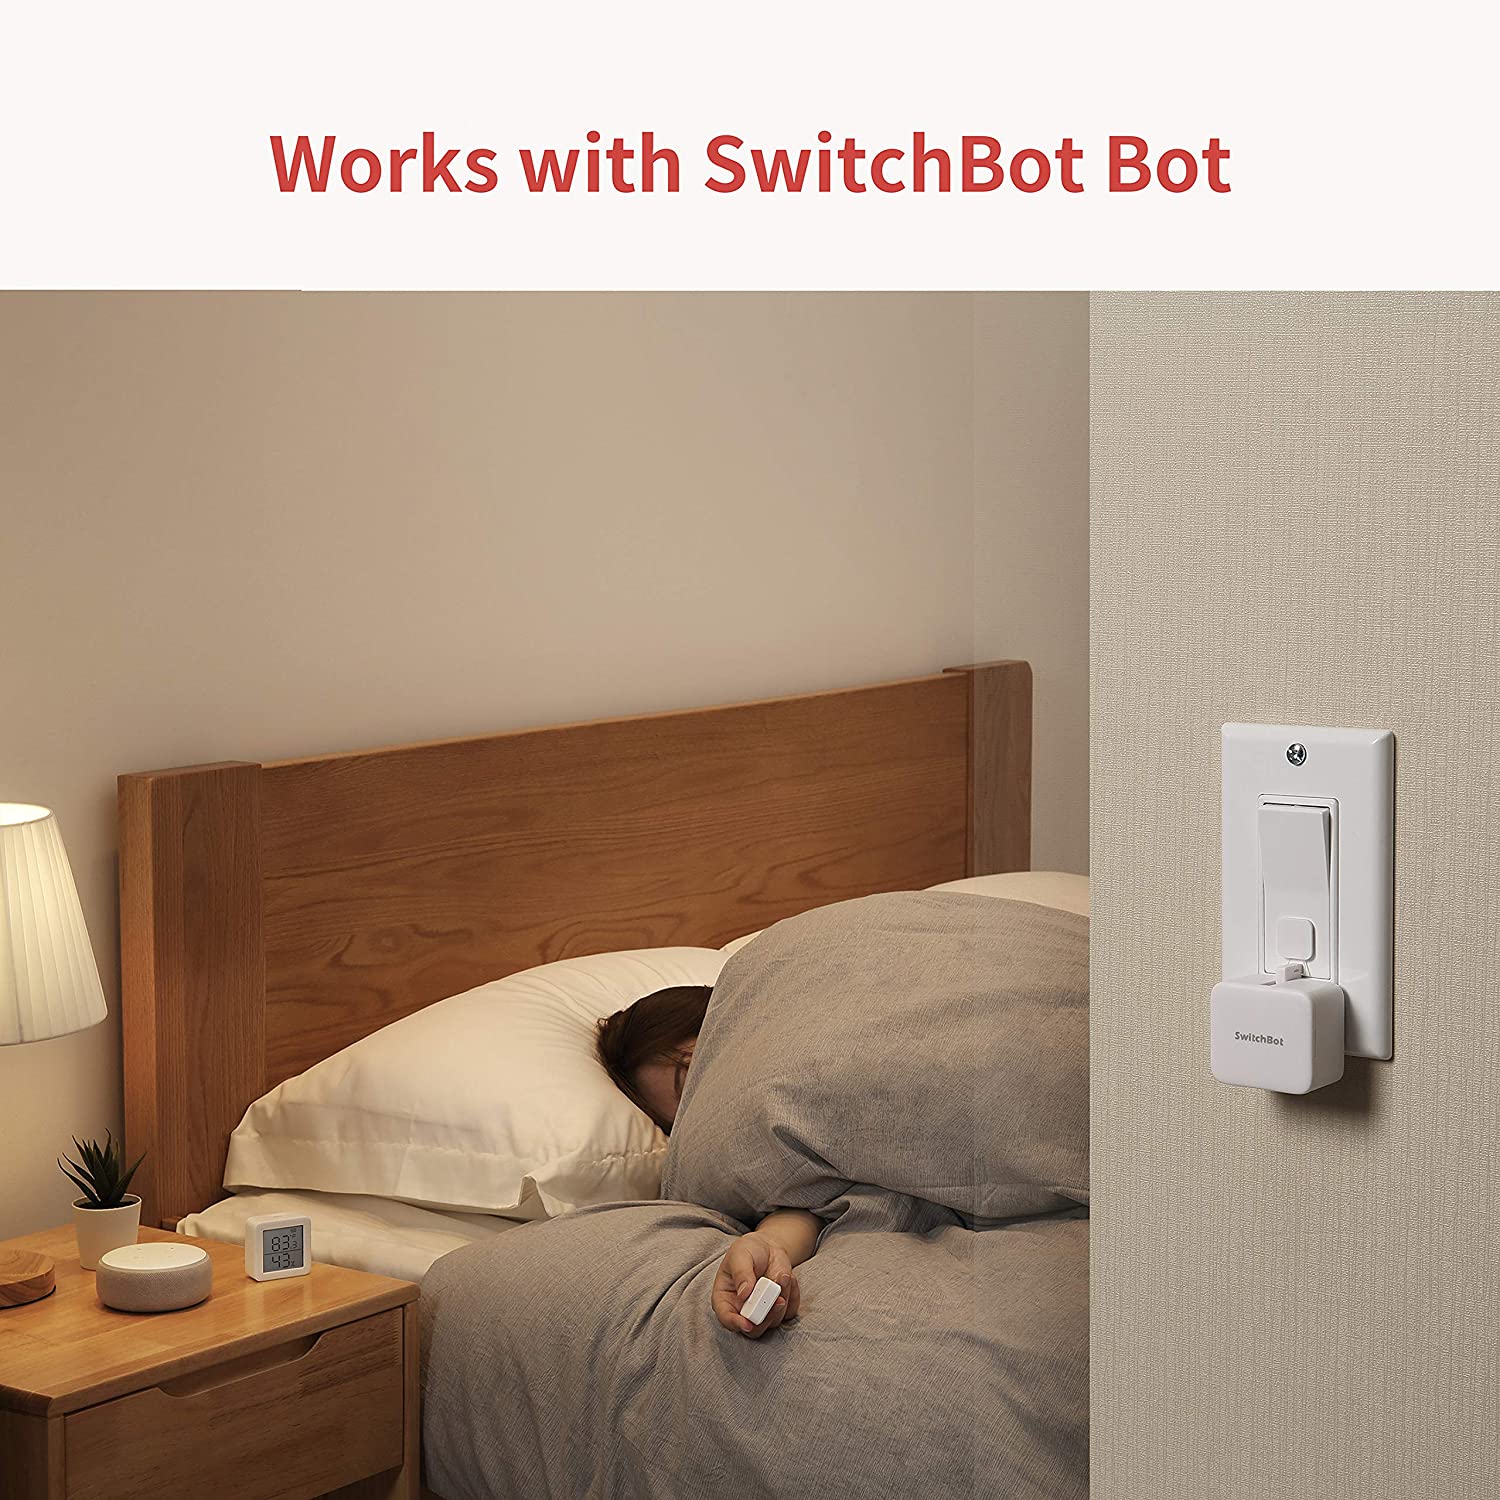 SwitchBot Remote | One Touch Button for SwitchBot Bot, Curtain, Color Bulb and LED Strip Light, Bluetooth Long Range 5.0